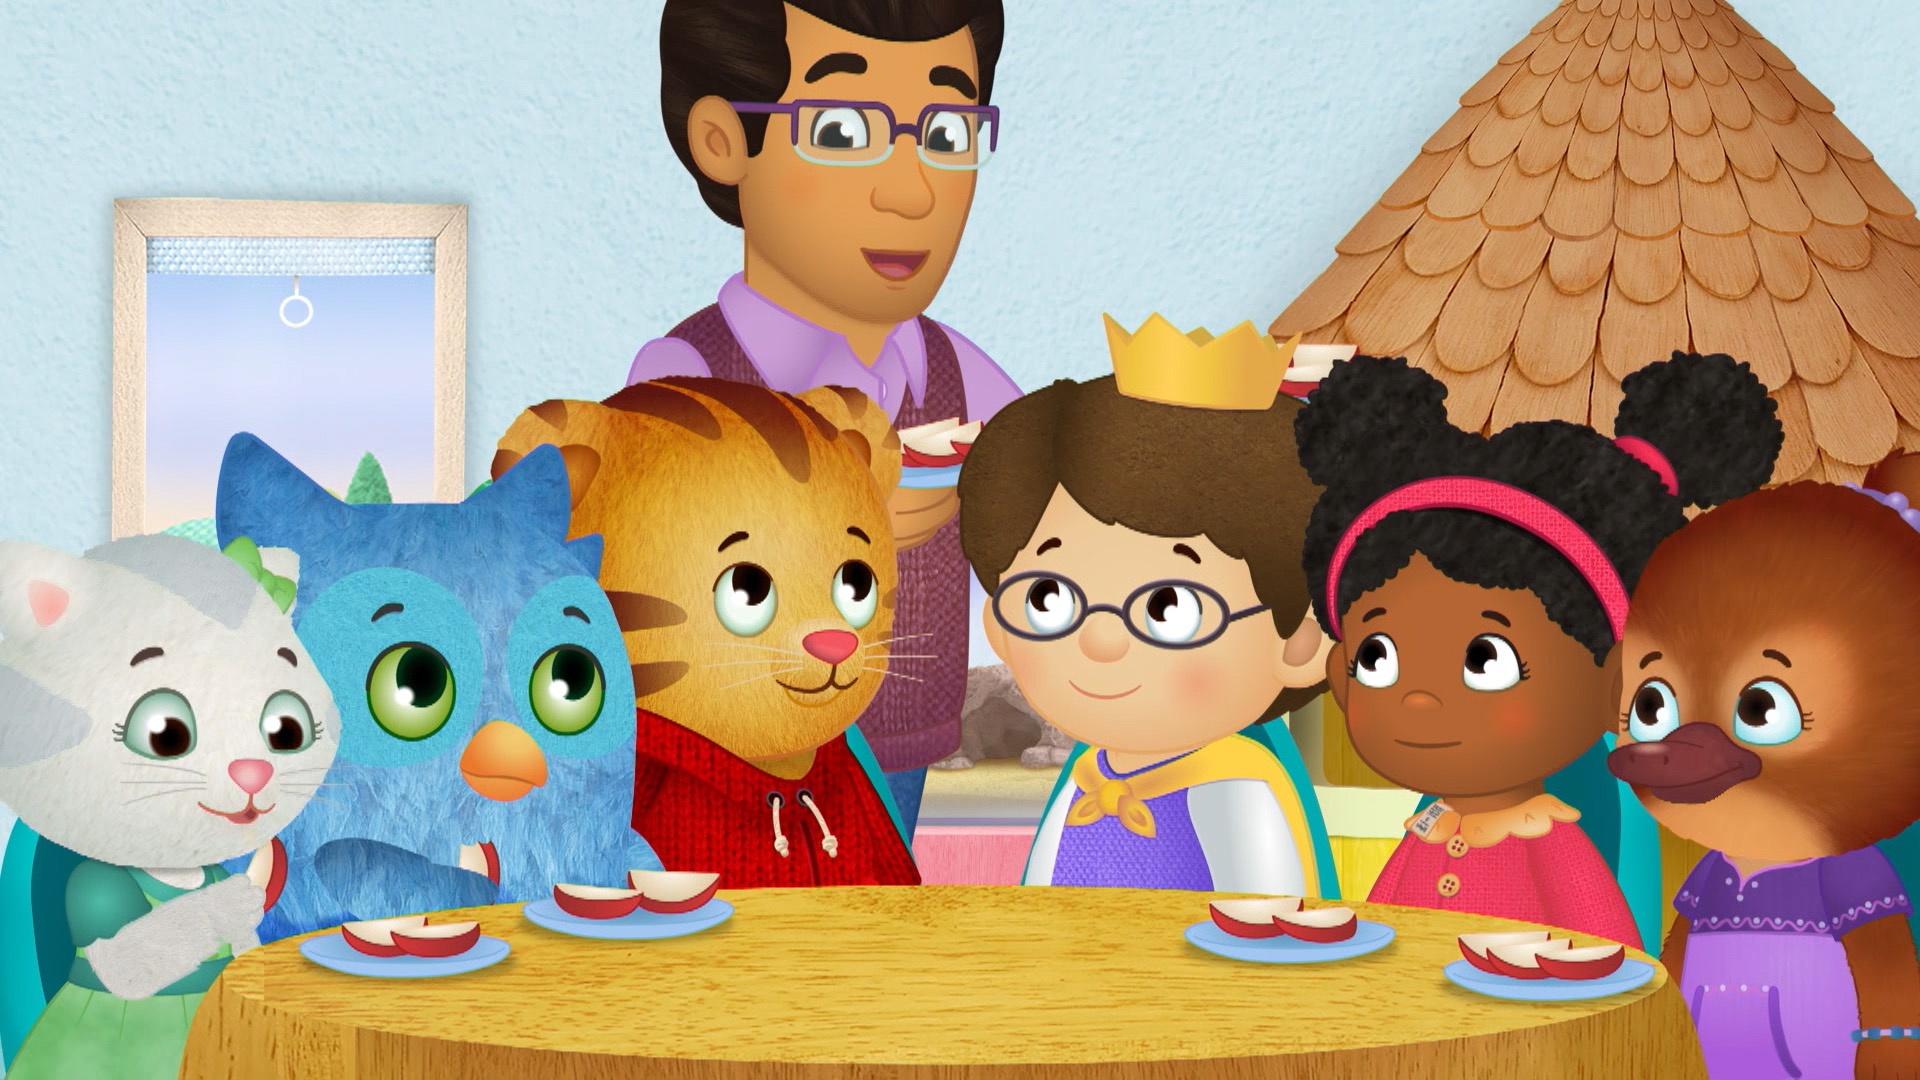 Daniel Tiger's Neighborhood - It's grr-ific! There's another new episode of Daniel  Tiger's Neighborhood coming up tomorrow on PBS KIDS (check local listings)!  Daniel and O are so excited to ride the